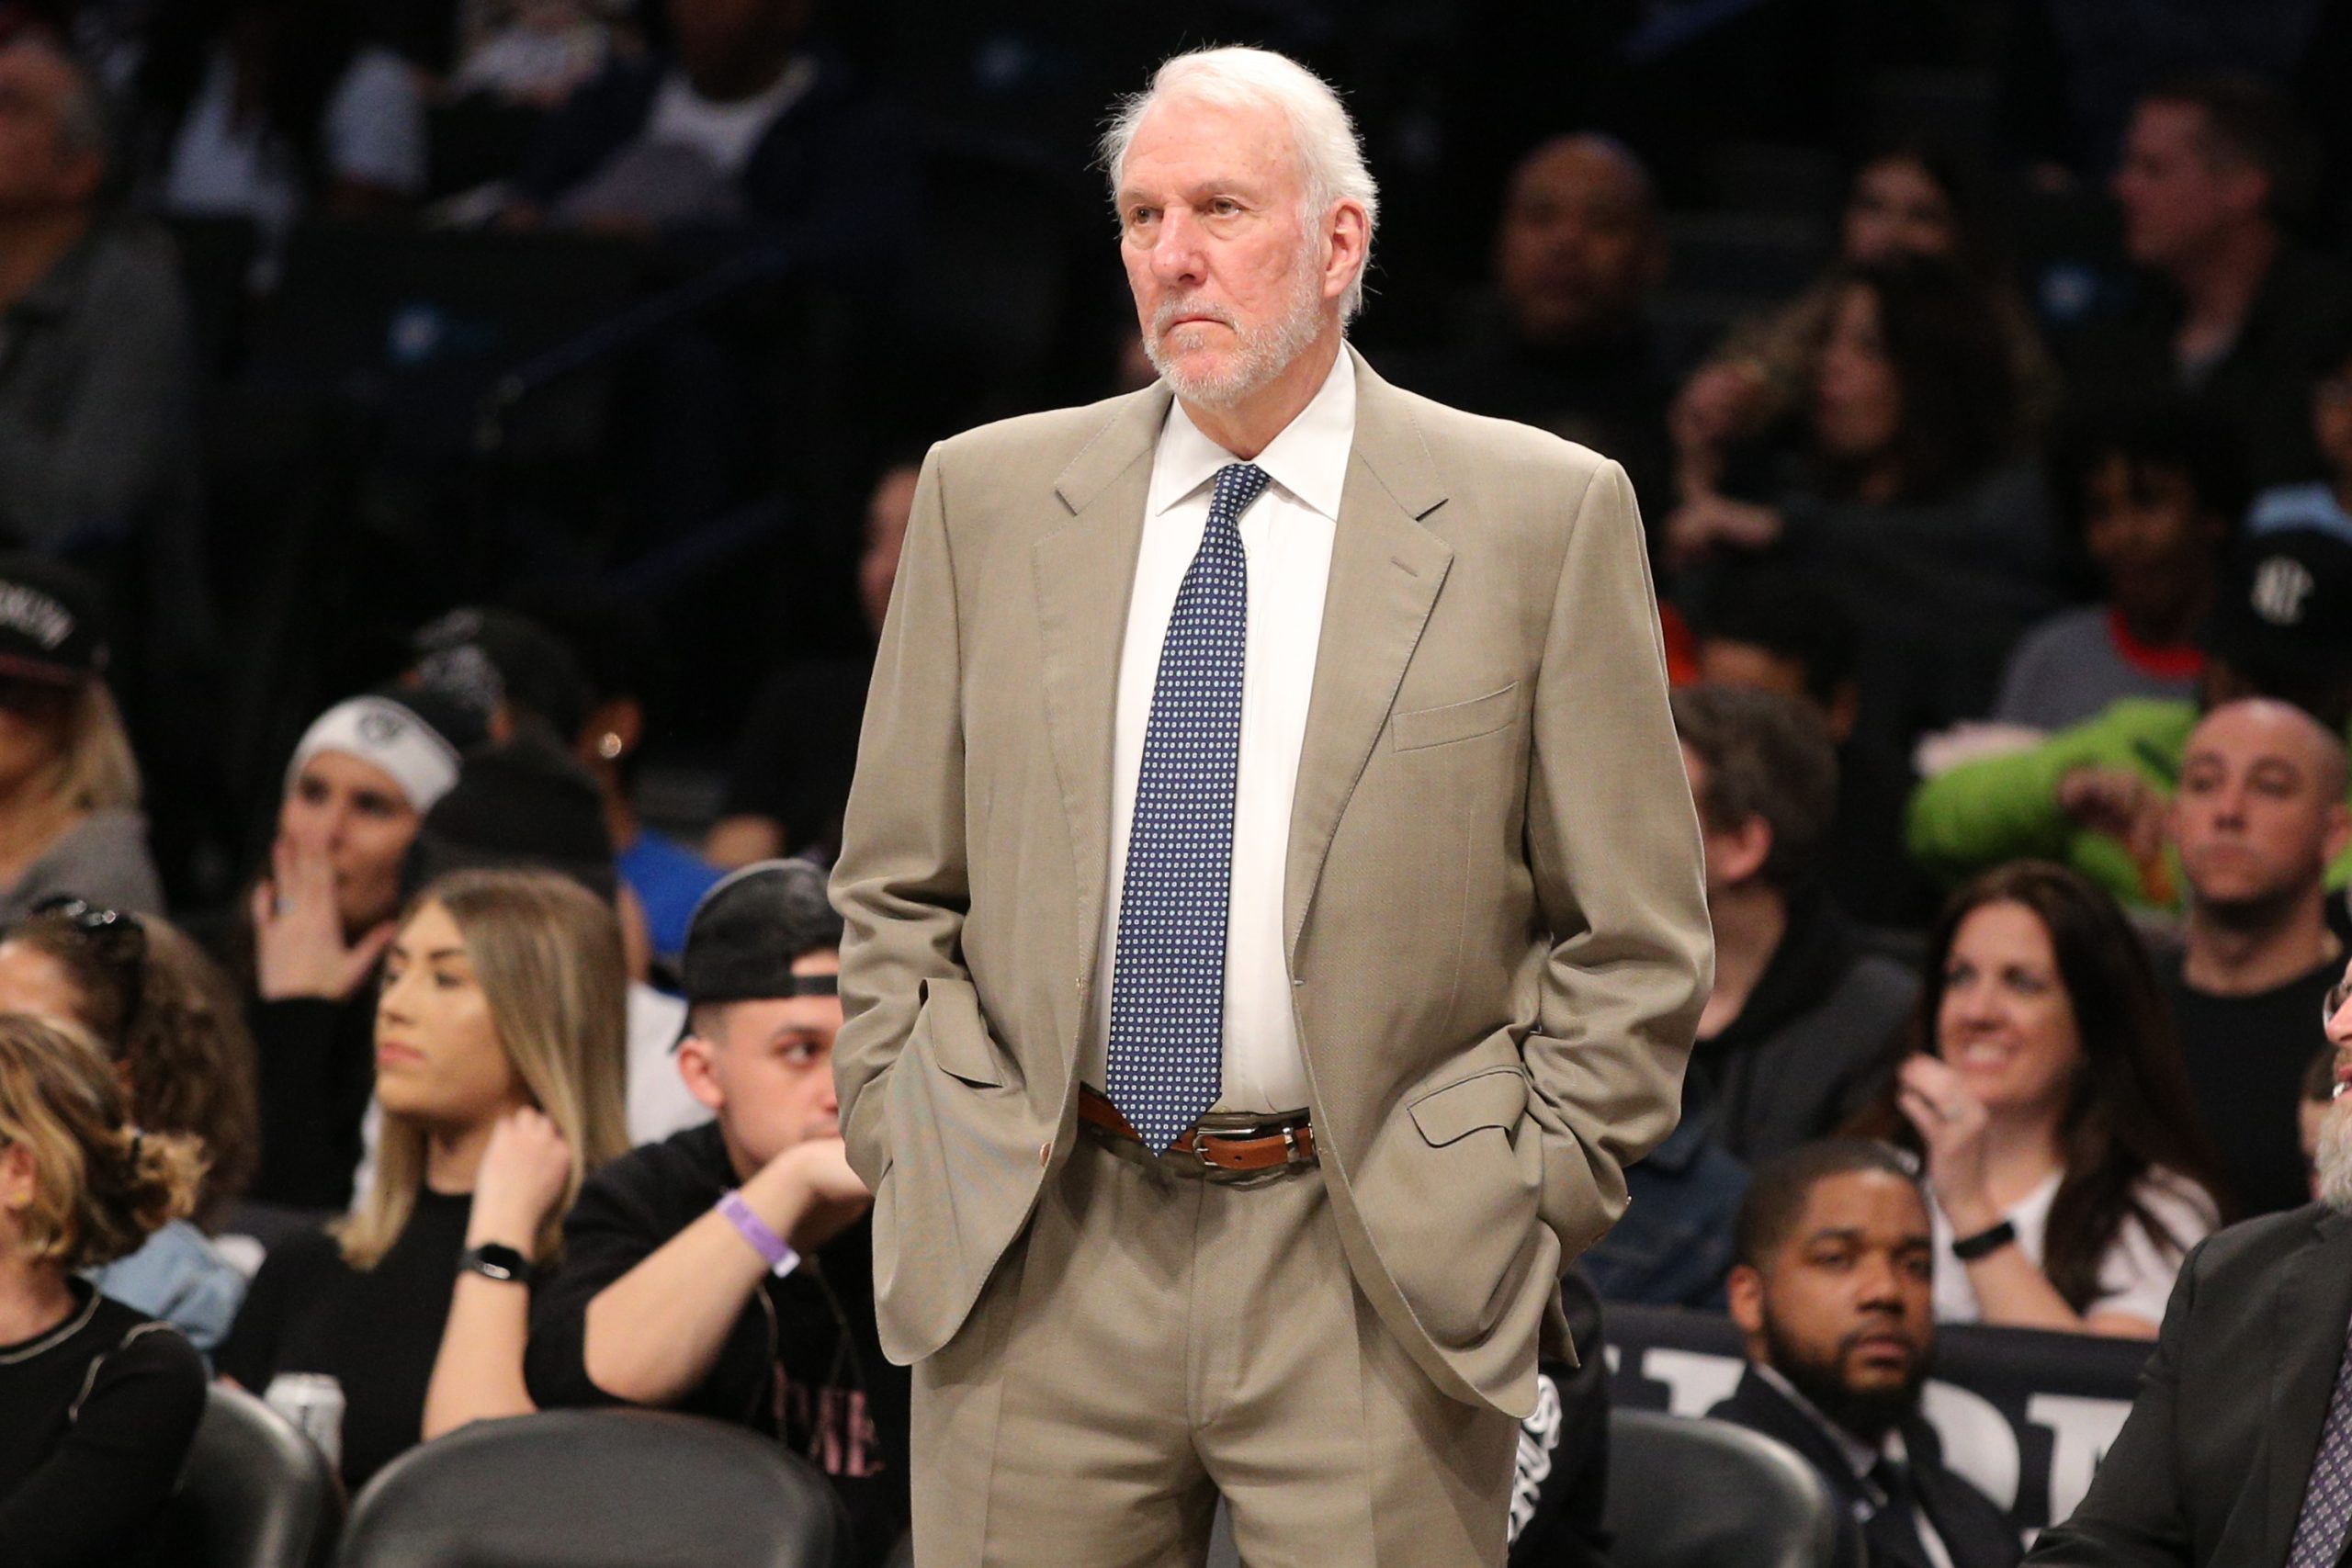 Gregg Popovich: Why a visible platform could be one reason to return